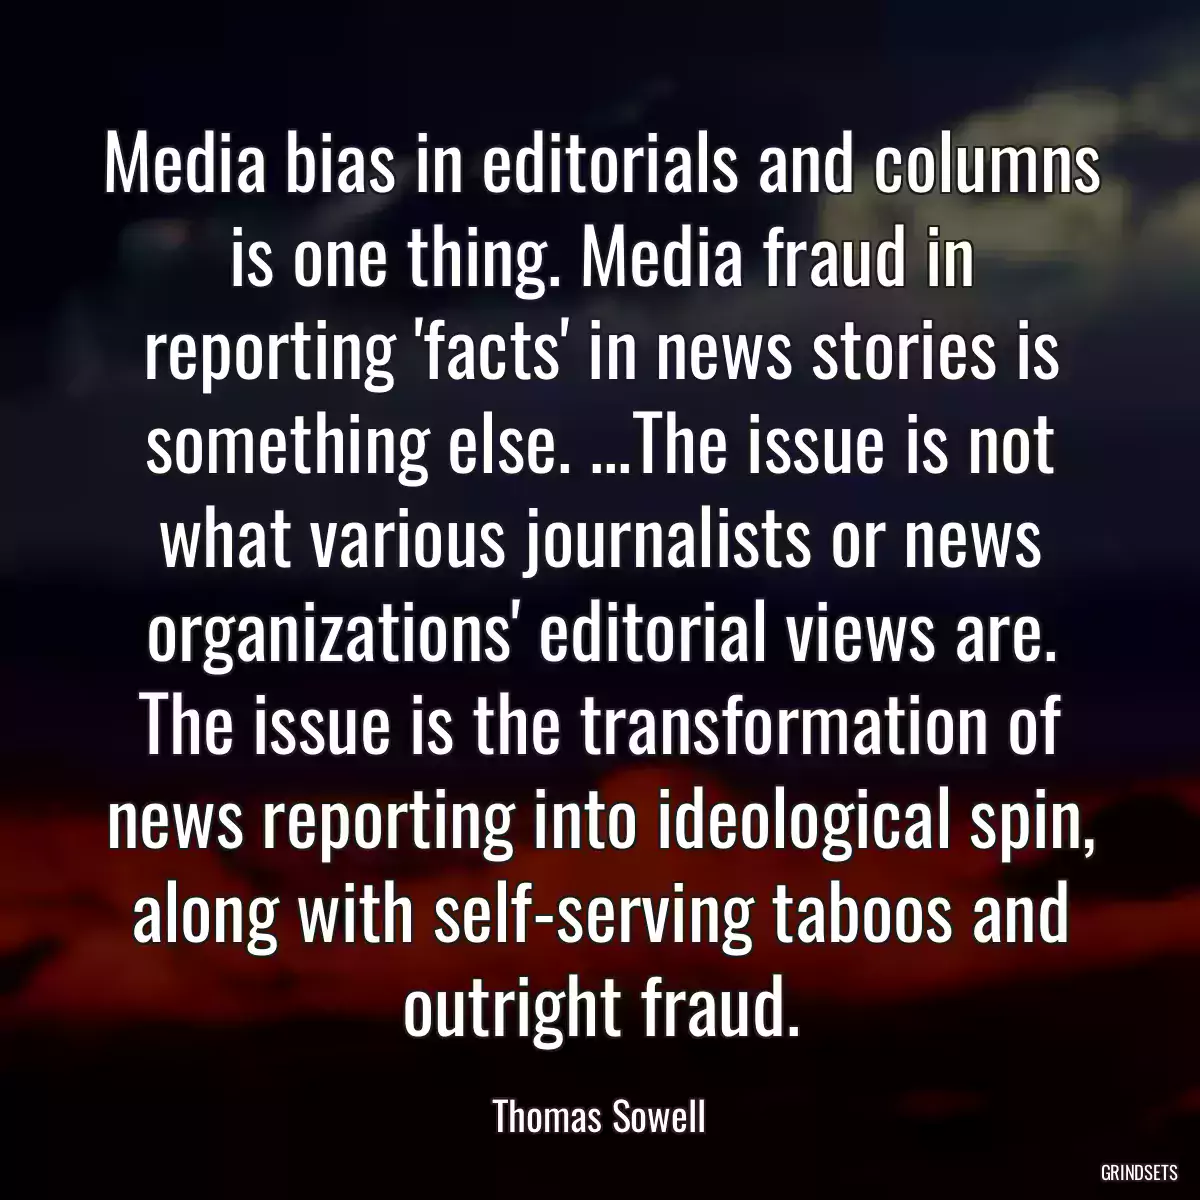 Media bias in editorials and columns is one thing. Media fraud in reporting \'facts\' in news stories is something else. ...The issue is not what various journalists or news organizations\' editorial views are. The issue is the transformation of news reporting into ideological spin, along with self-serving taboos and outright fraud.